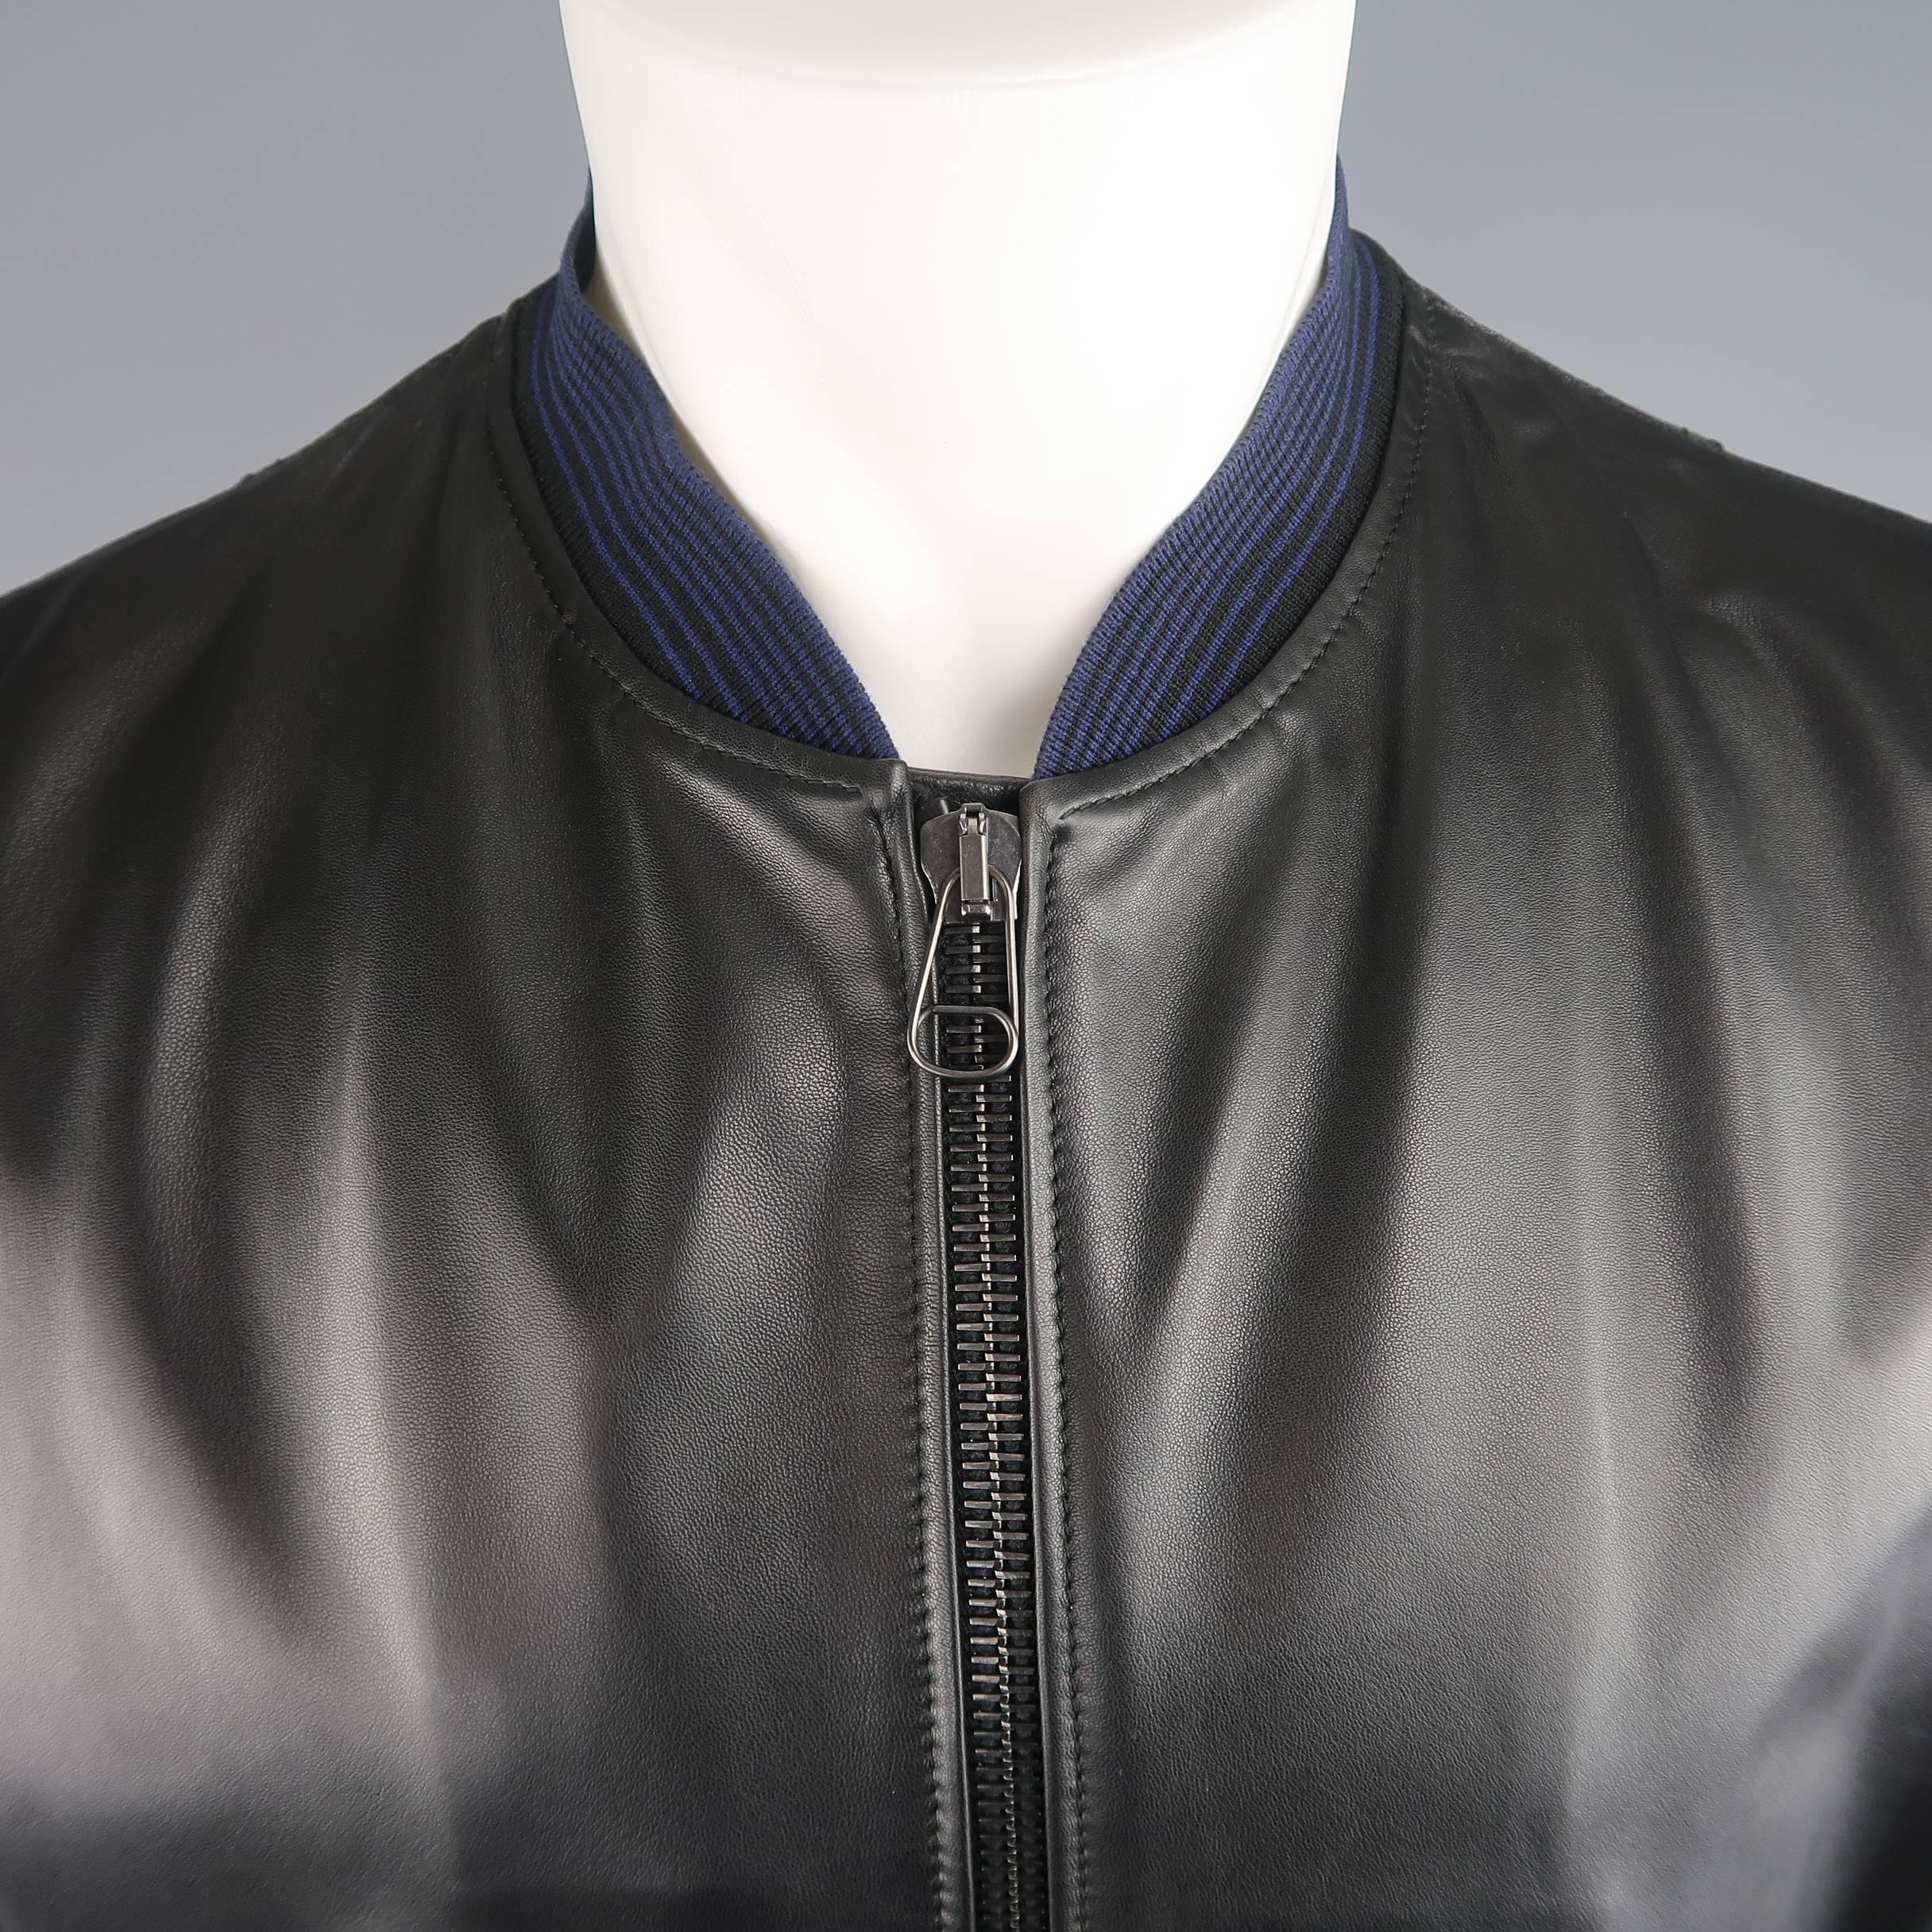 Tailored LANVIN bomber jacket comes in charcoal canvas and features a smooth black leather front panel with slanted snap pockets, zip closure, sleeve pockets, and blue striped baseball collar, cuffs, and waistband. Made in Italy.
 
Excellent